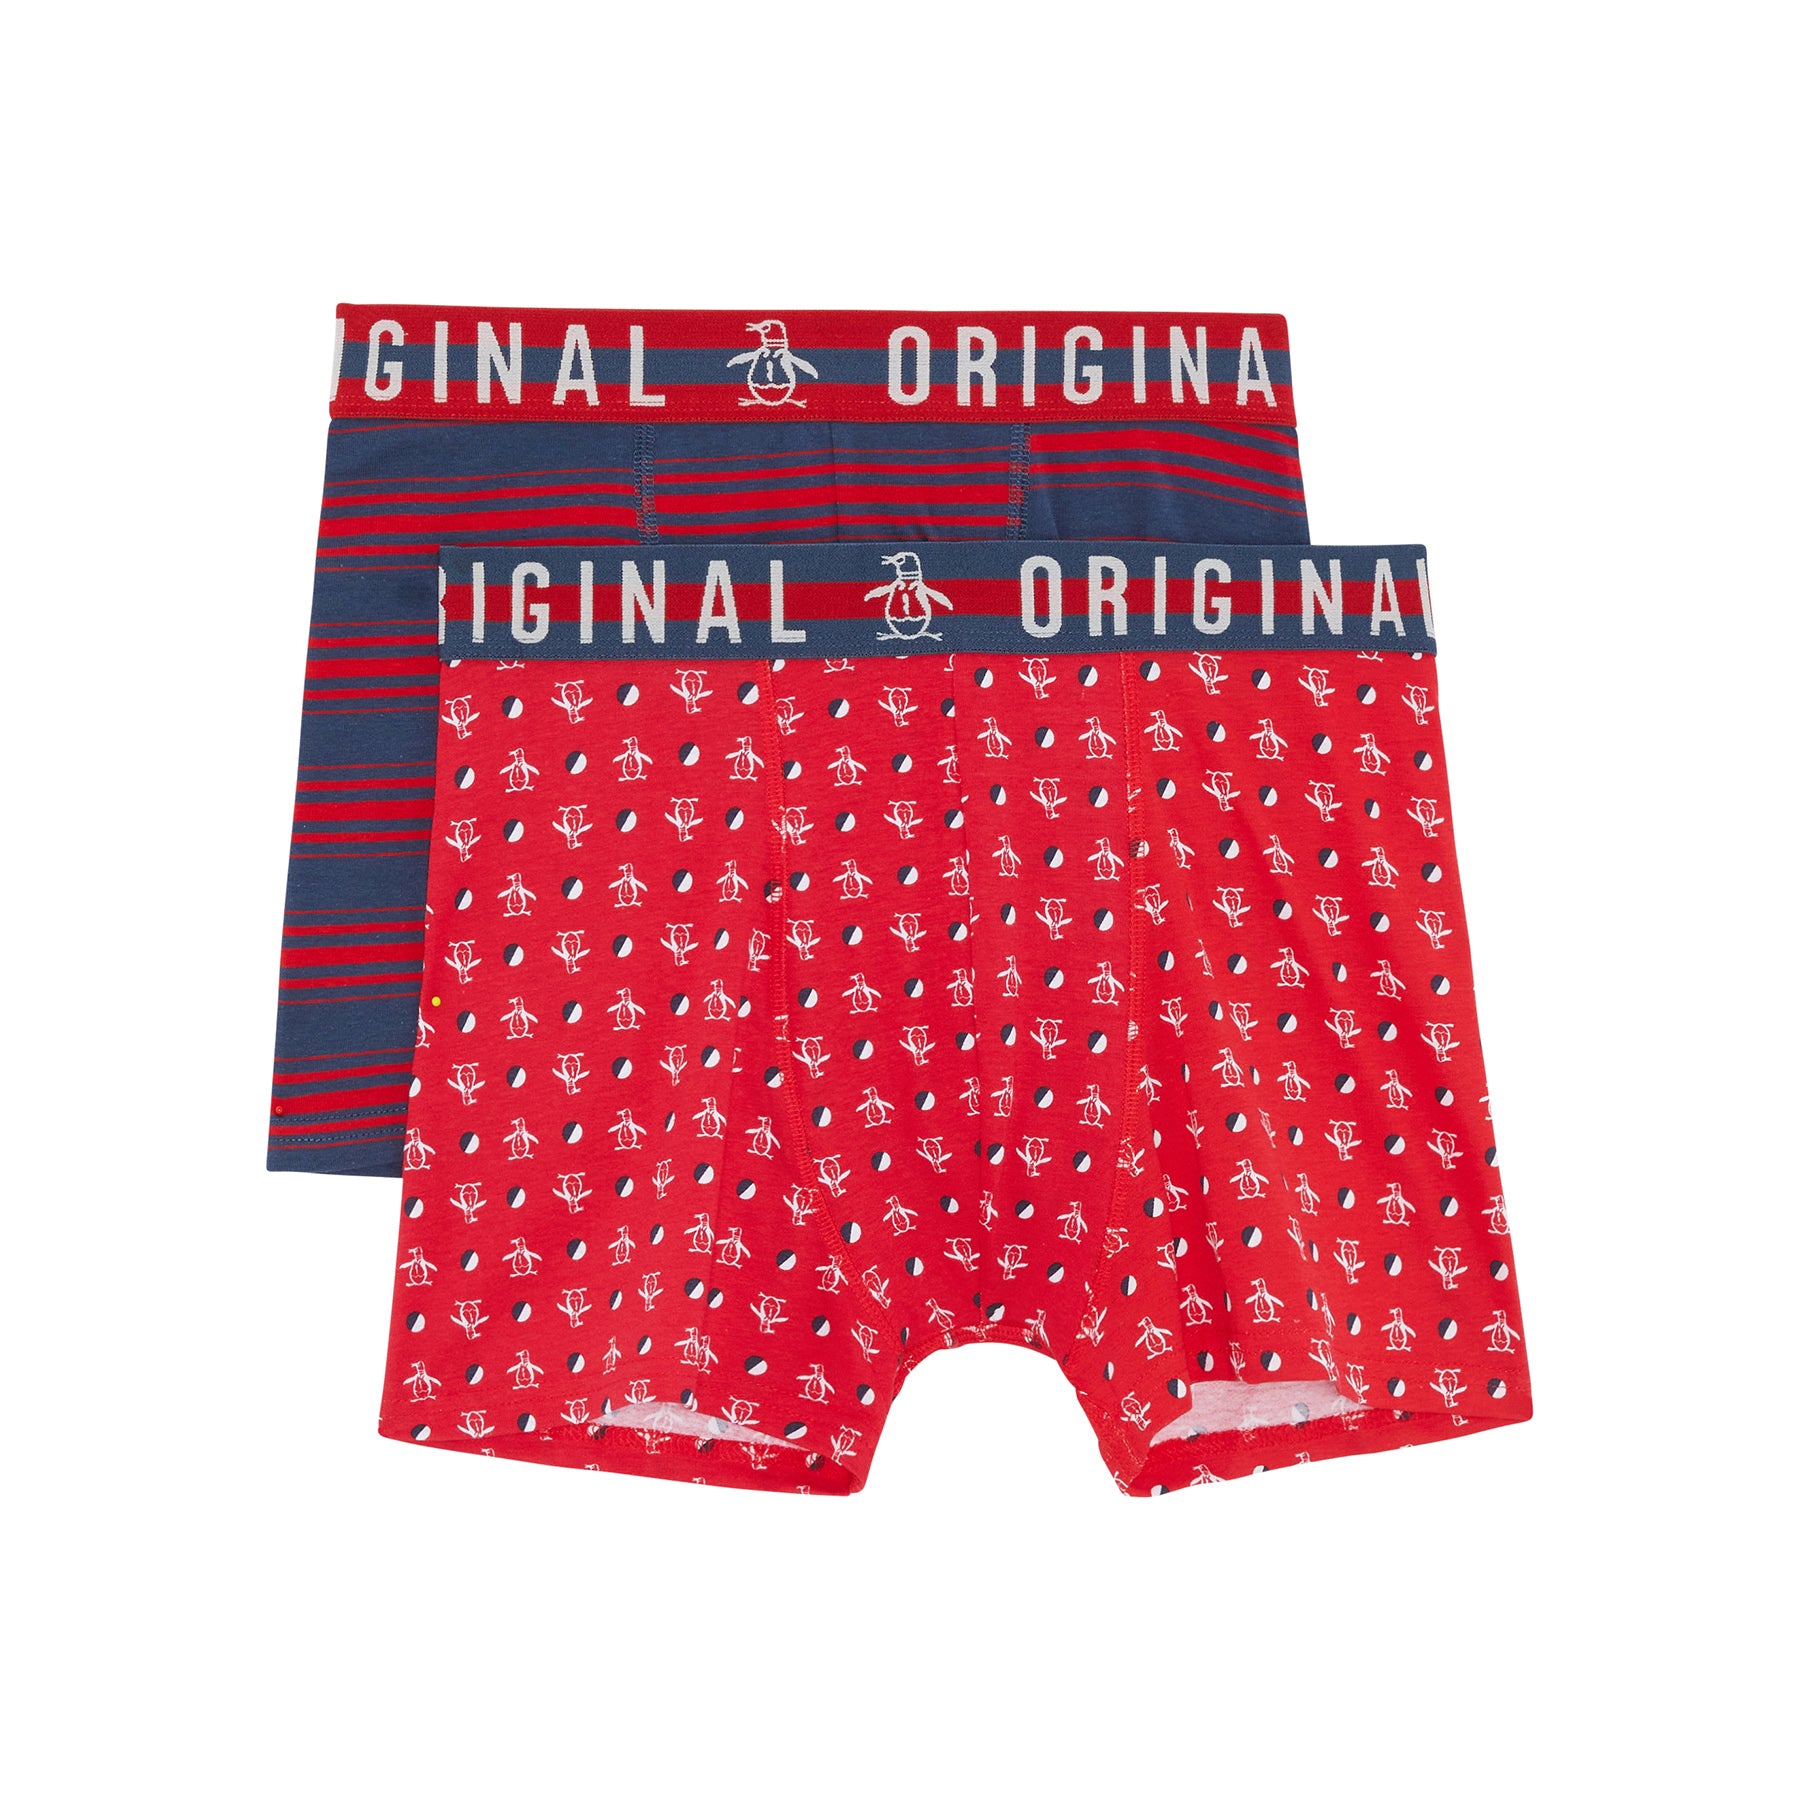 View Original Penguin 2 Pack Stamp All Over Penguin Pete Print Underwear In Red And Navy Red Mens information